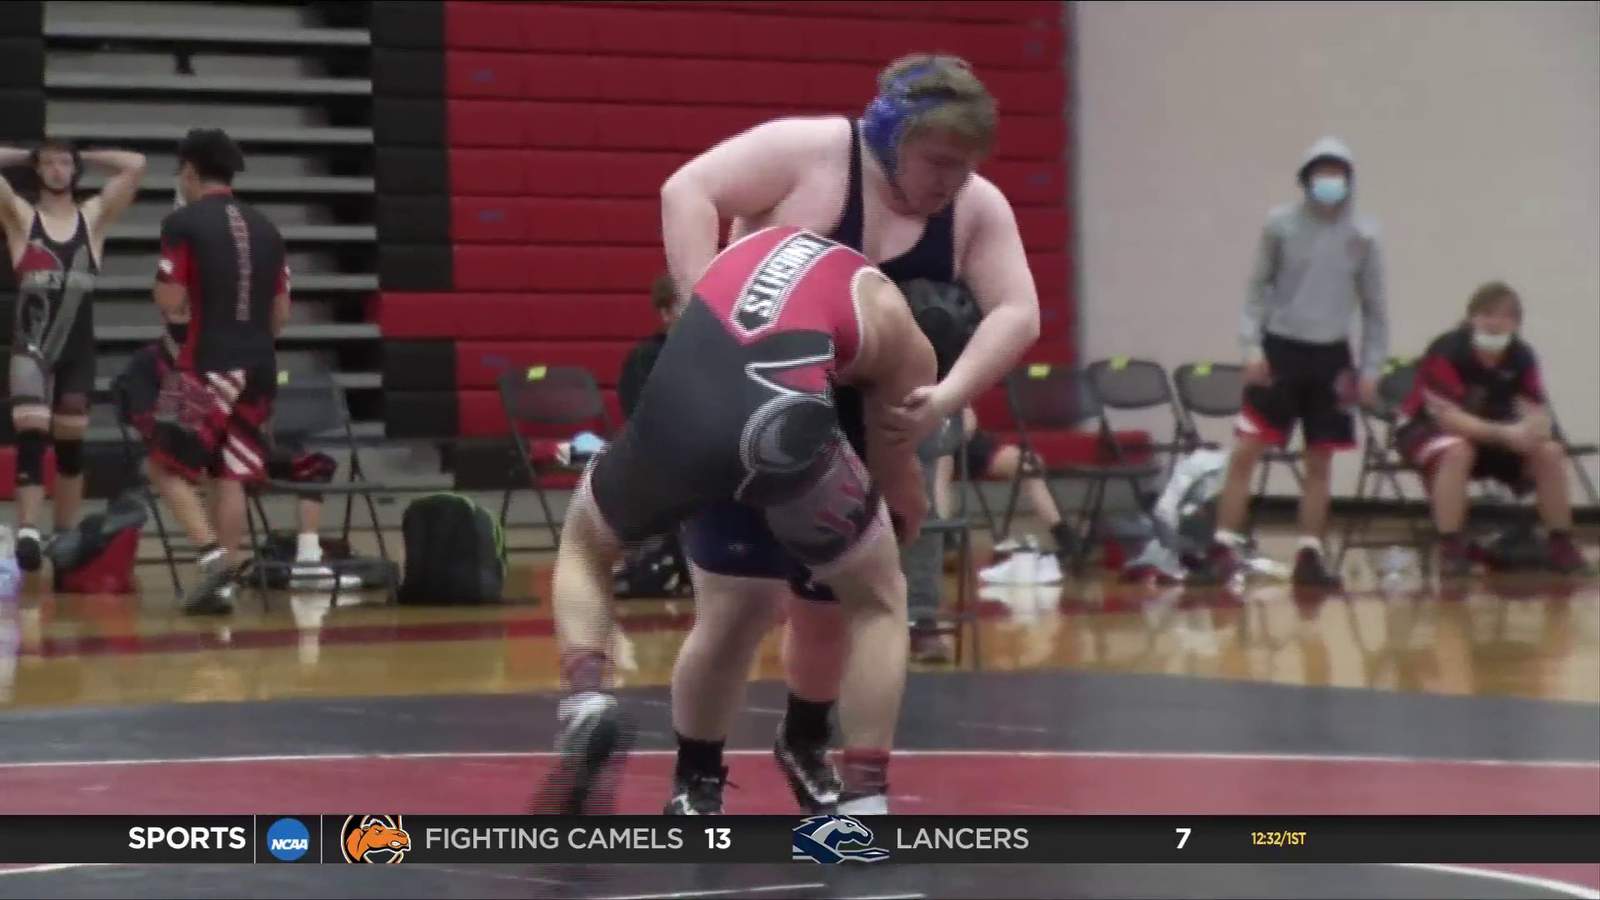 WATCH: James River faces Parry McCluer in wrestling dual